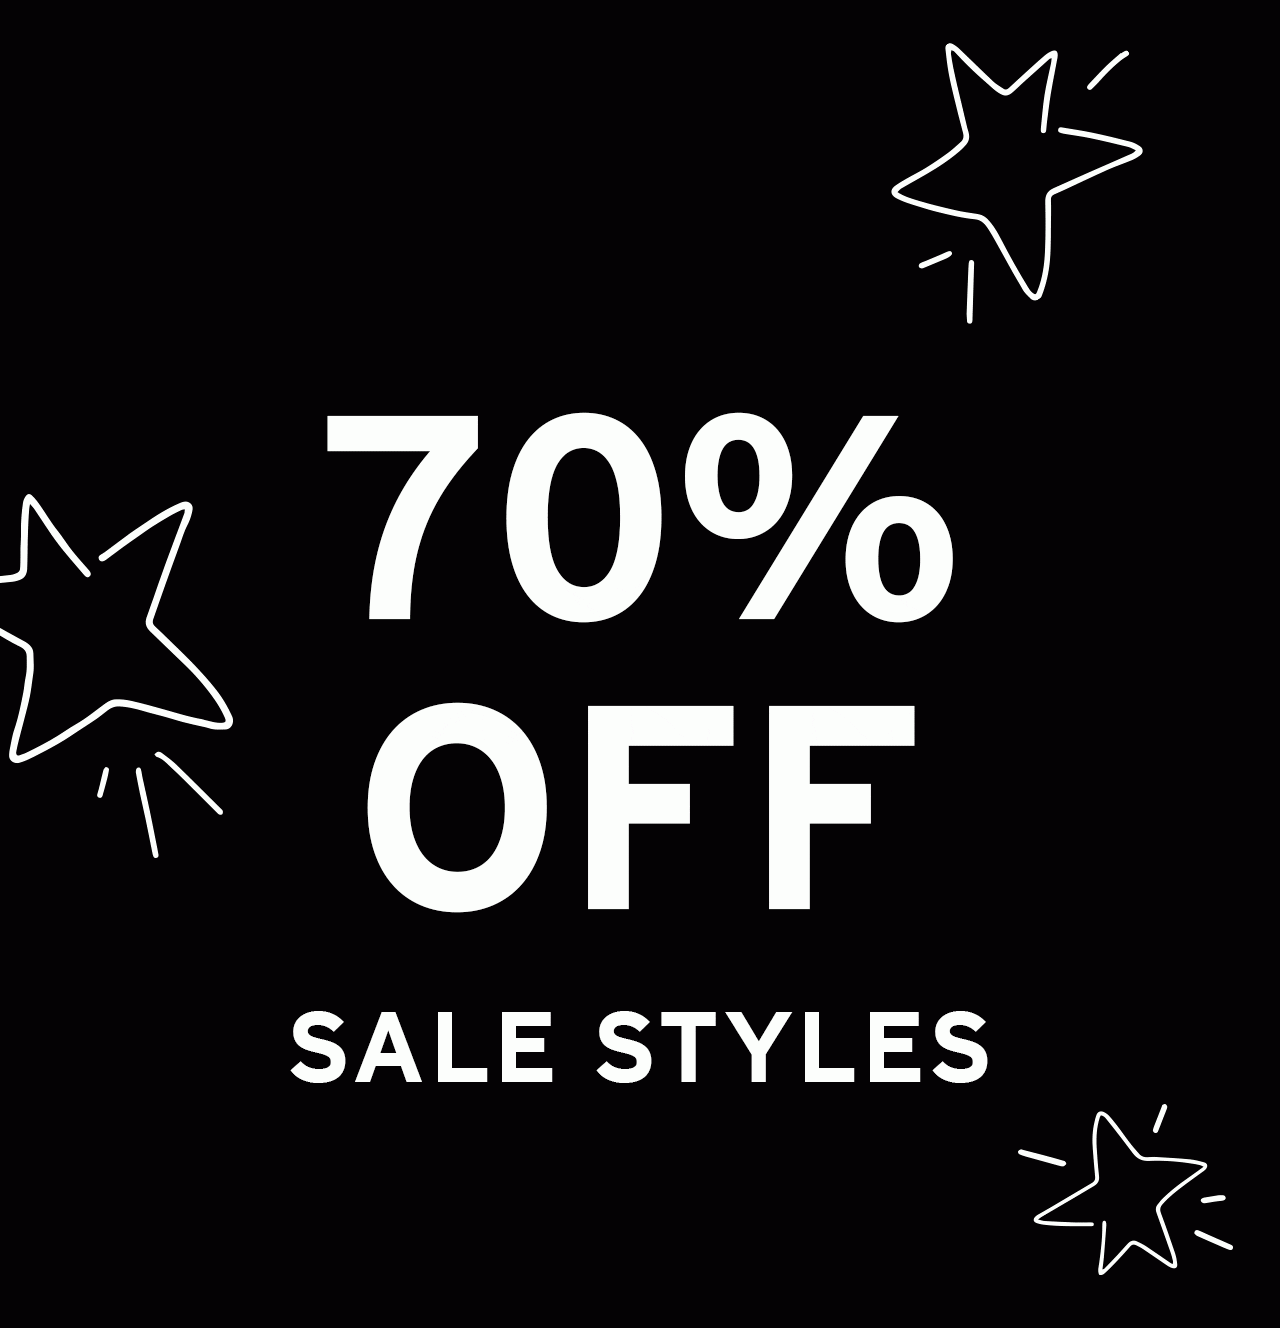 UP TO 70% OFF SALE STYLES